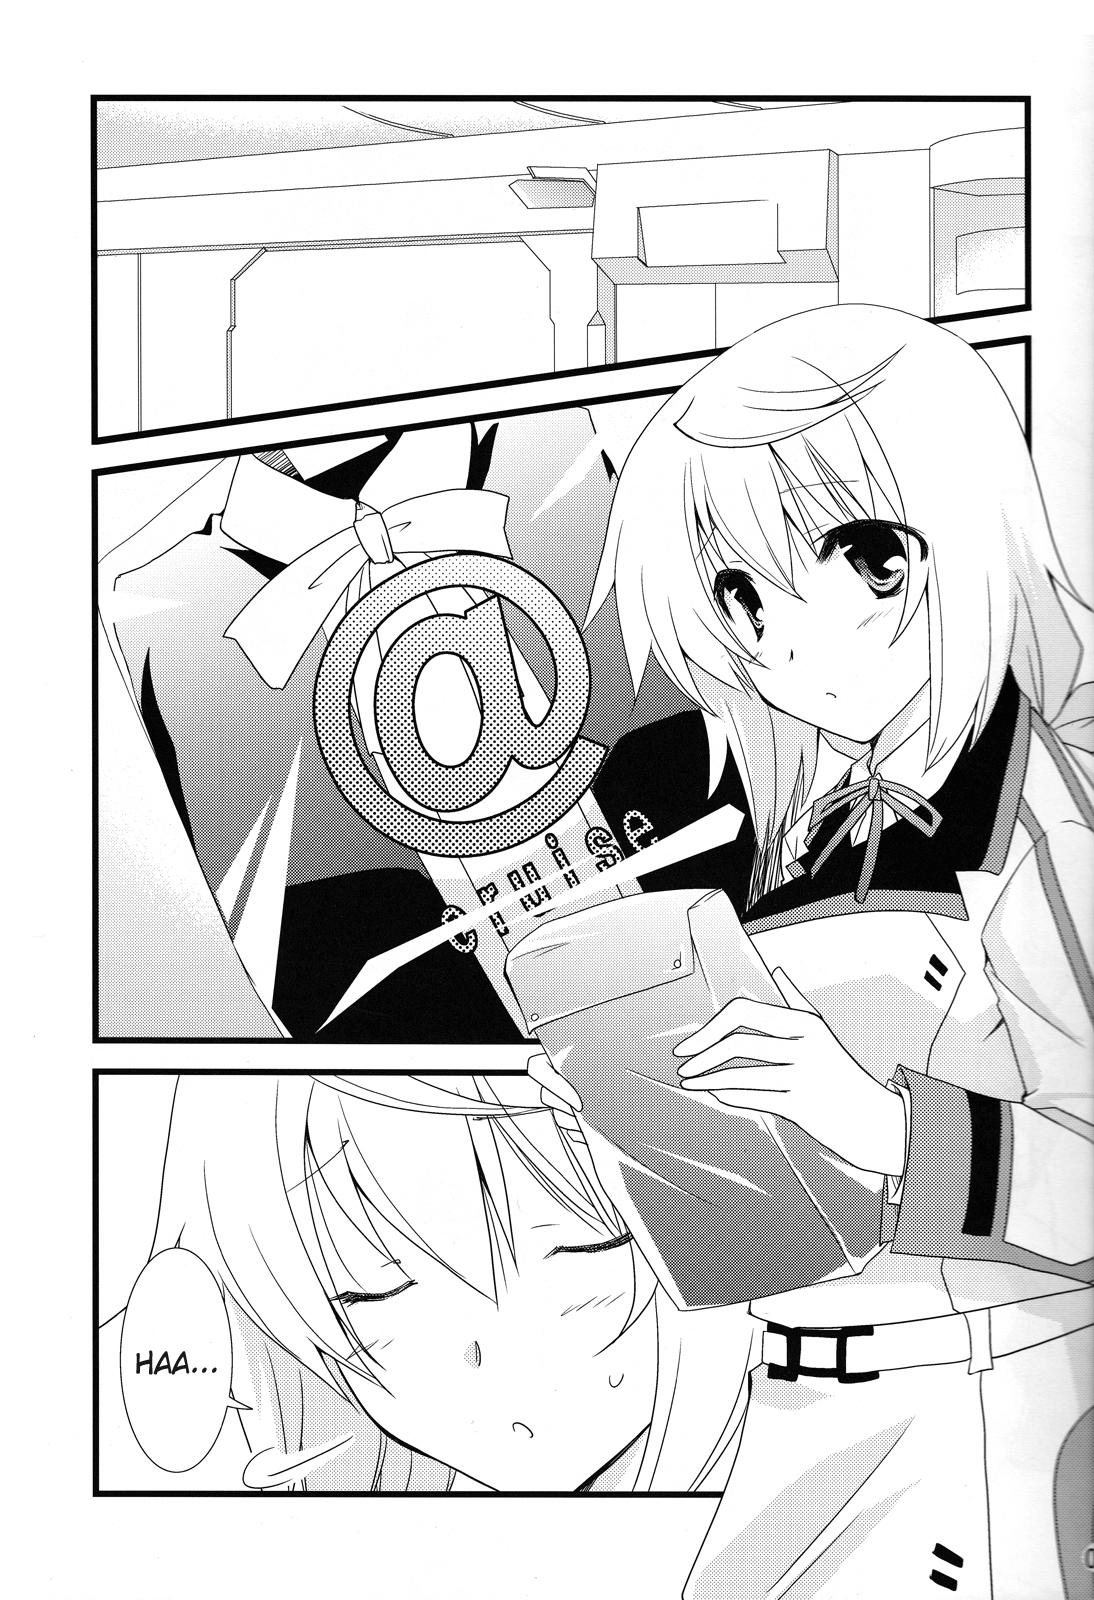 Young Men LOVE MASTER - Infinite stratos Blowjob - Page 4